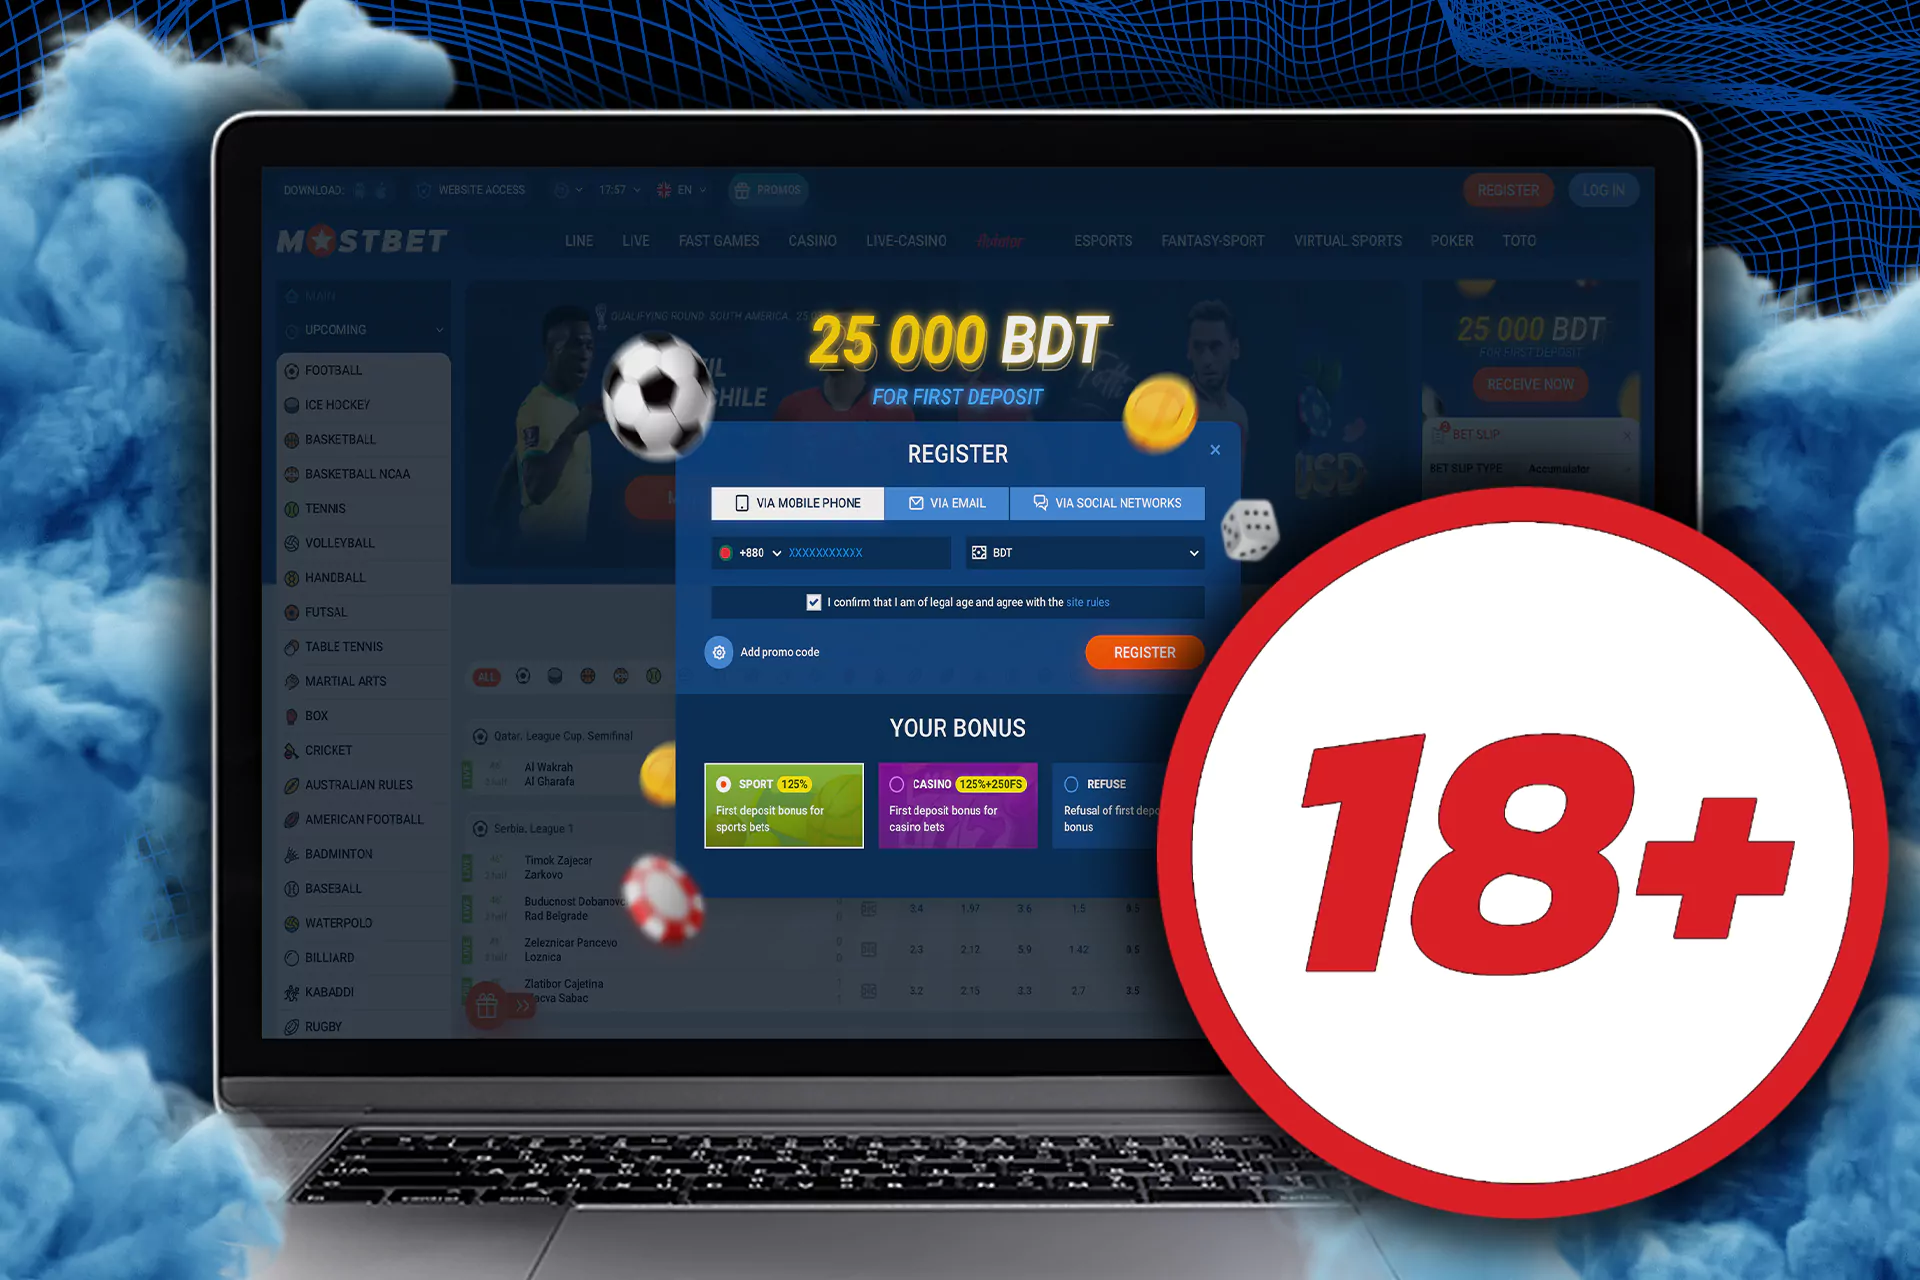 There are certain rules to adhere to register at Mostbet with no problems.